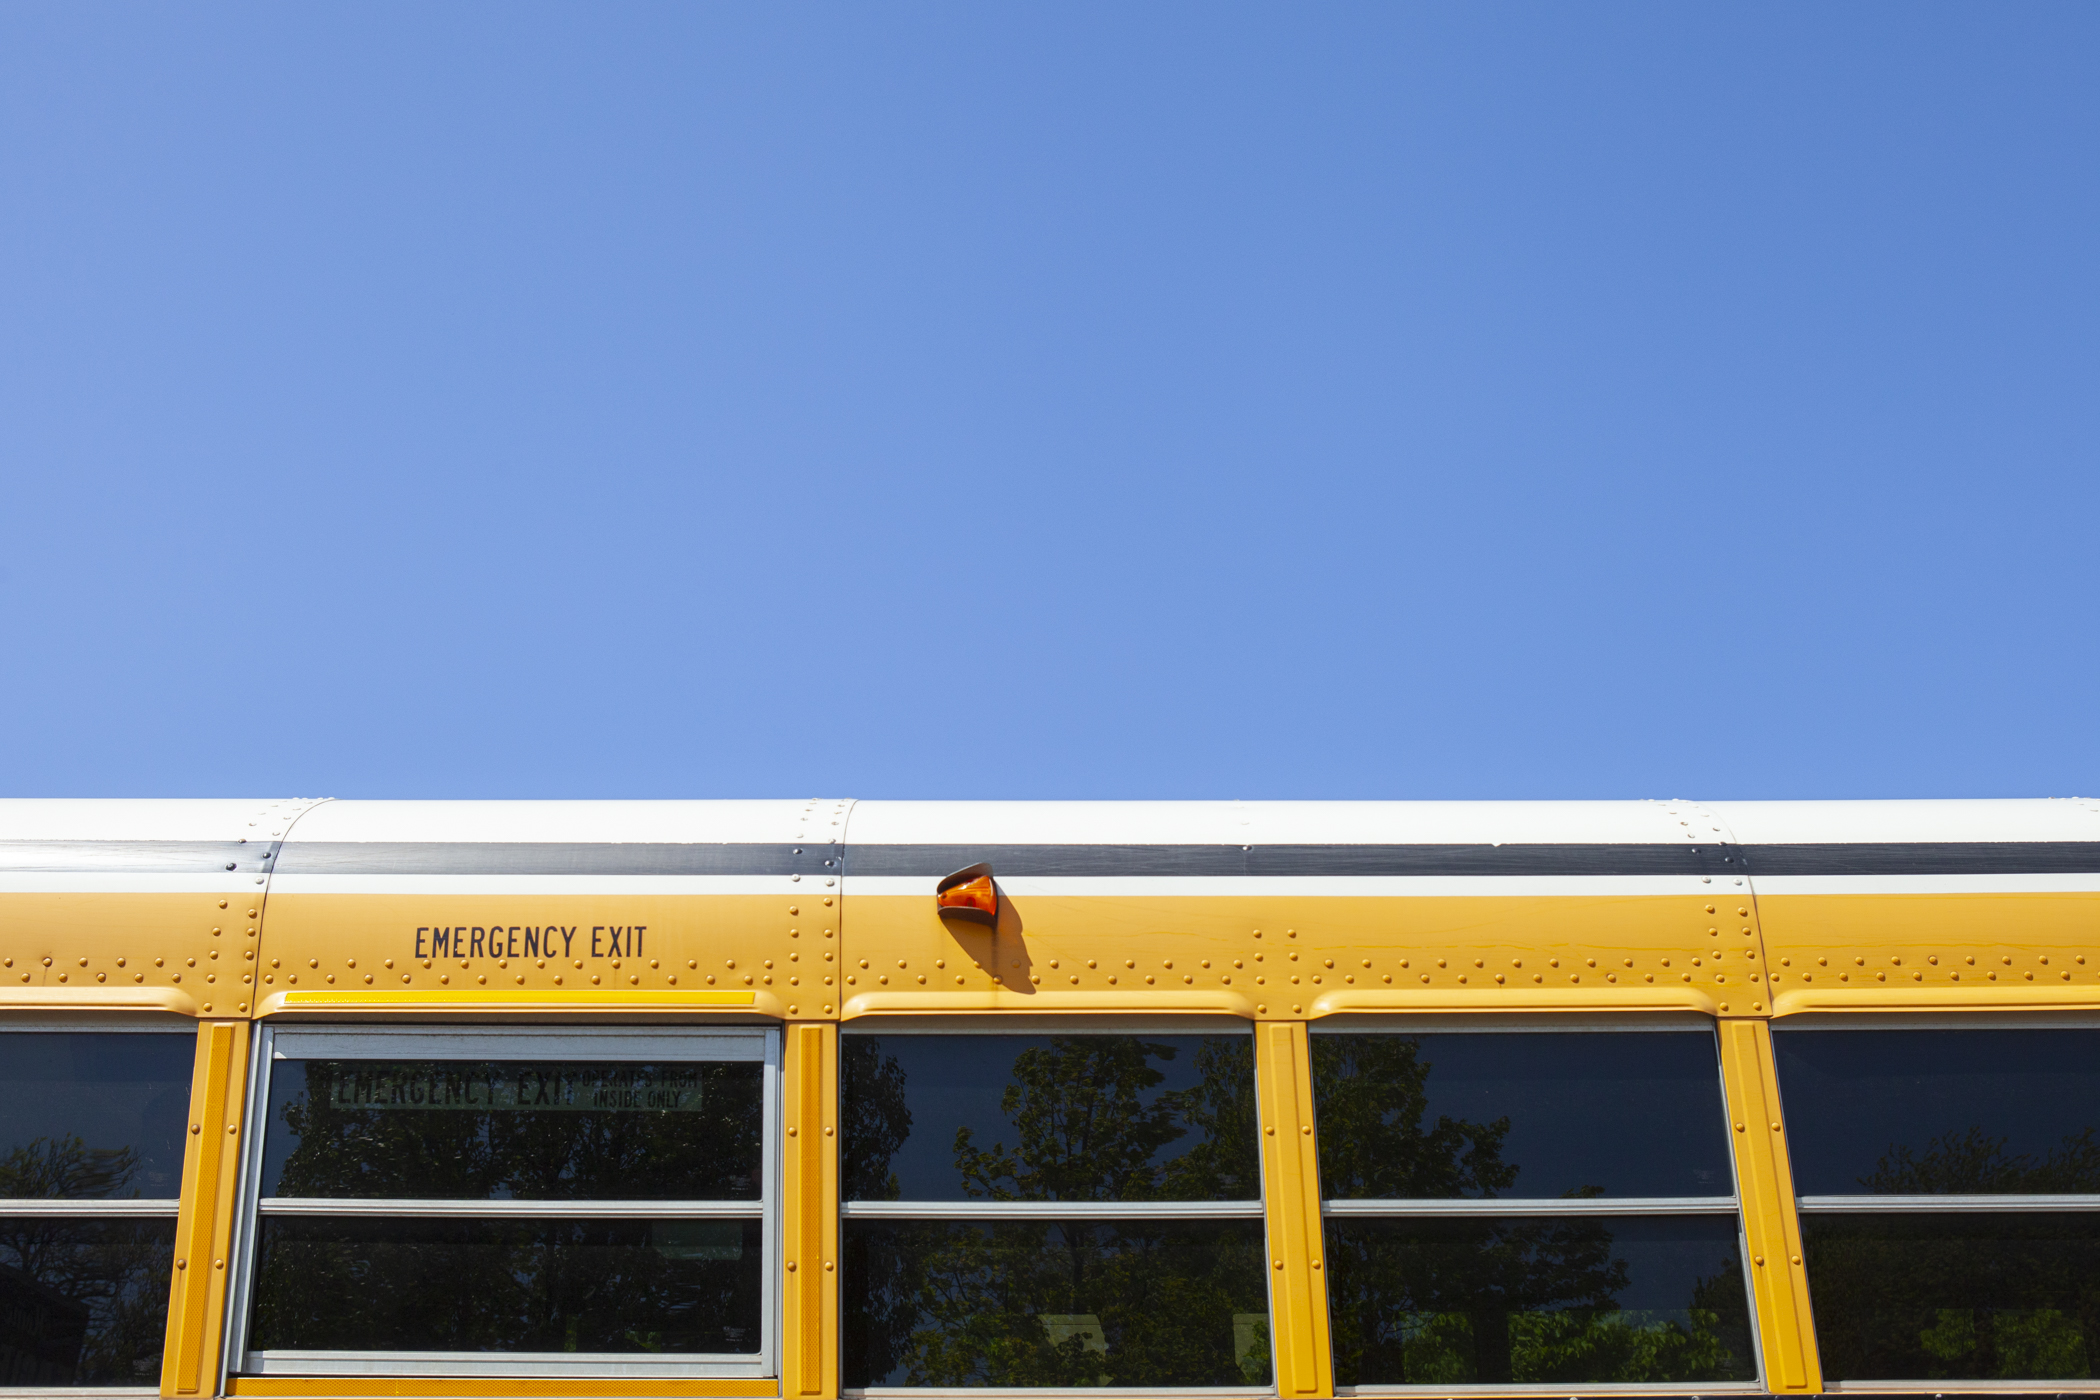 The top of a school bus splits is pictured against a bright blue sky.